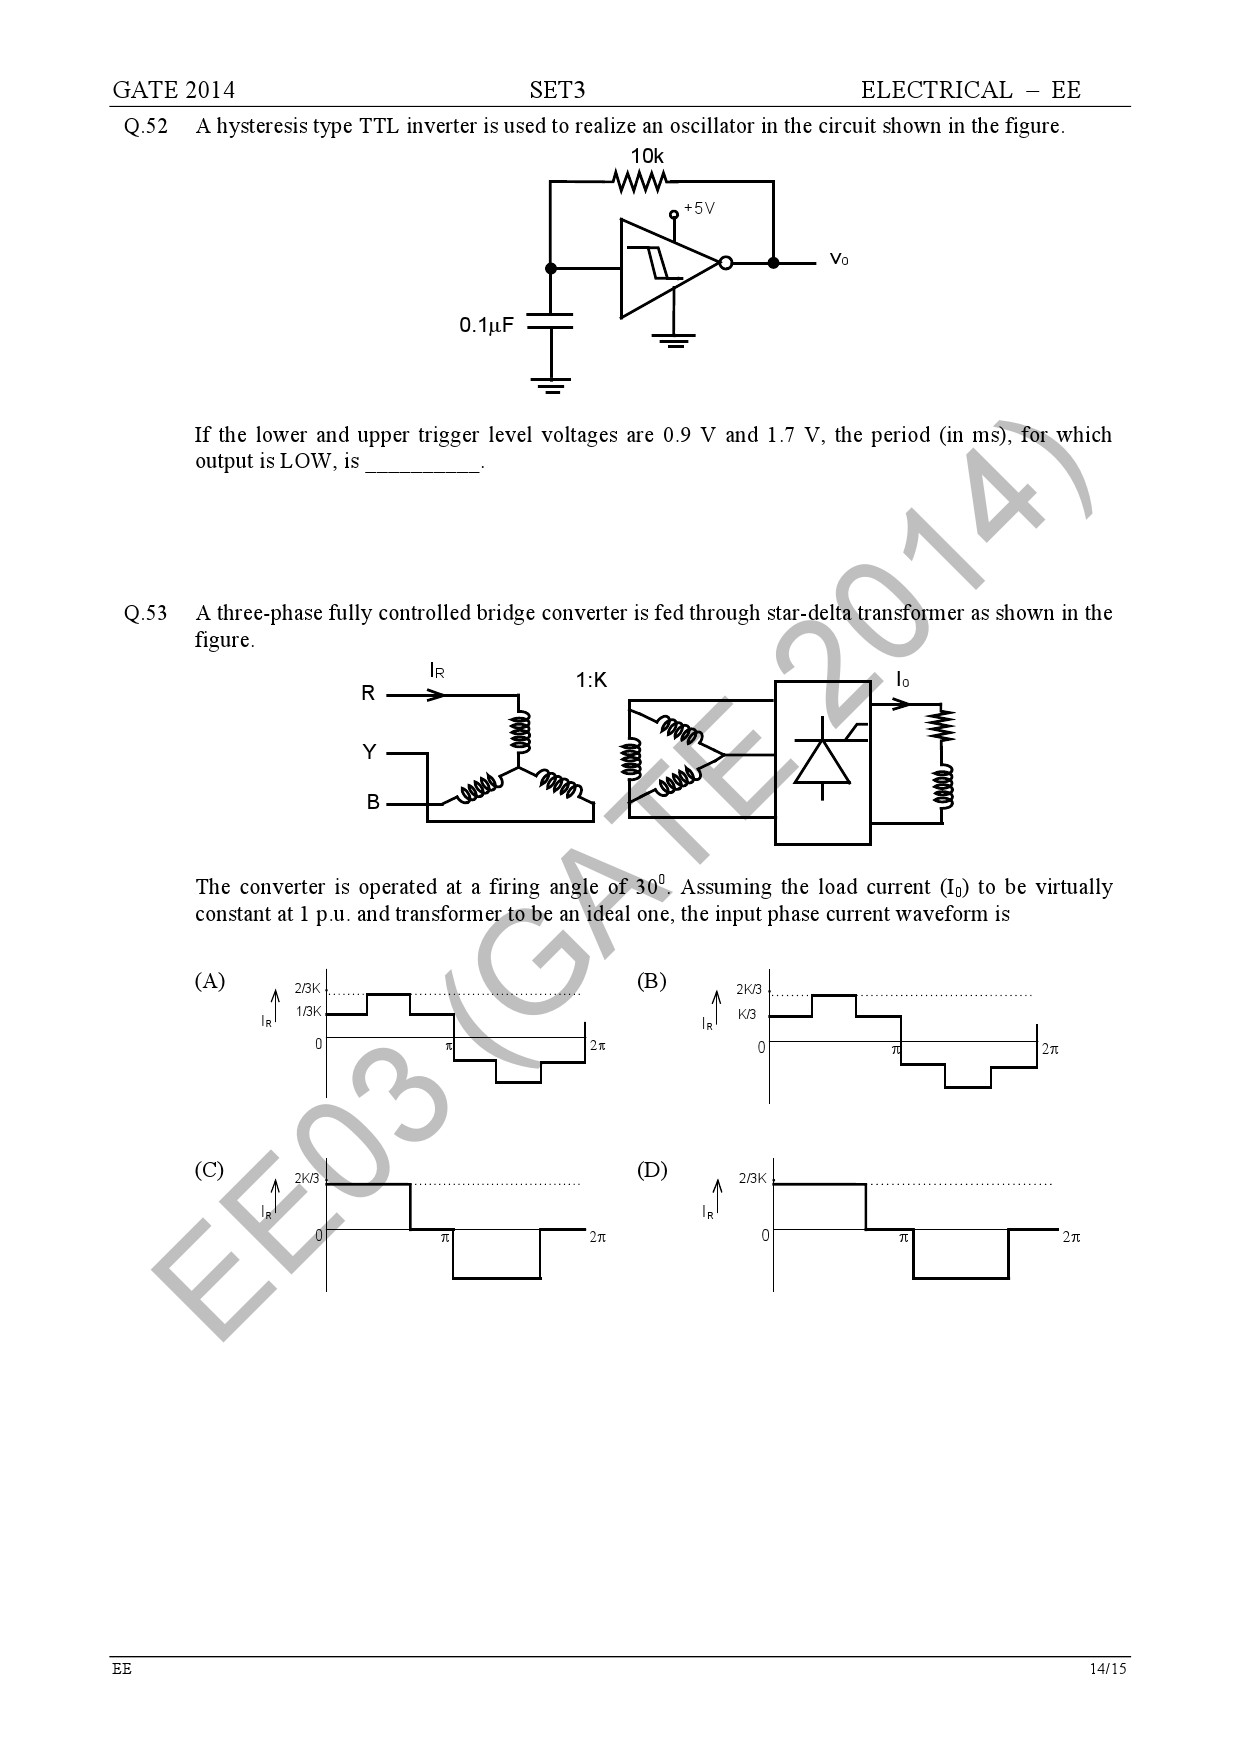 GATE Exam Question Paper 2014 Electrical Engineering Set 3 20